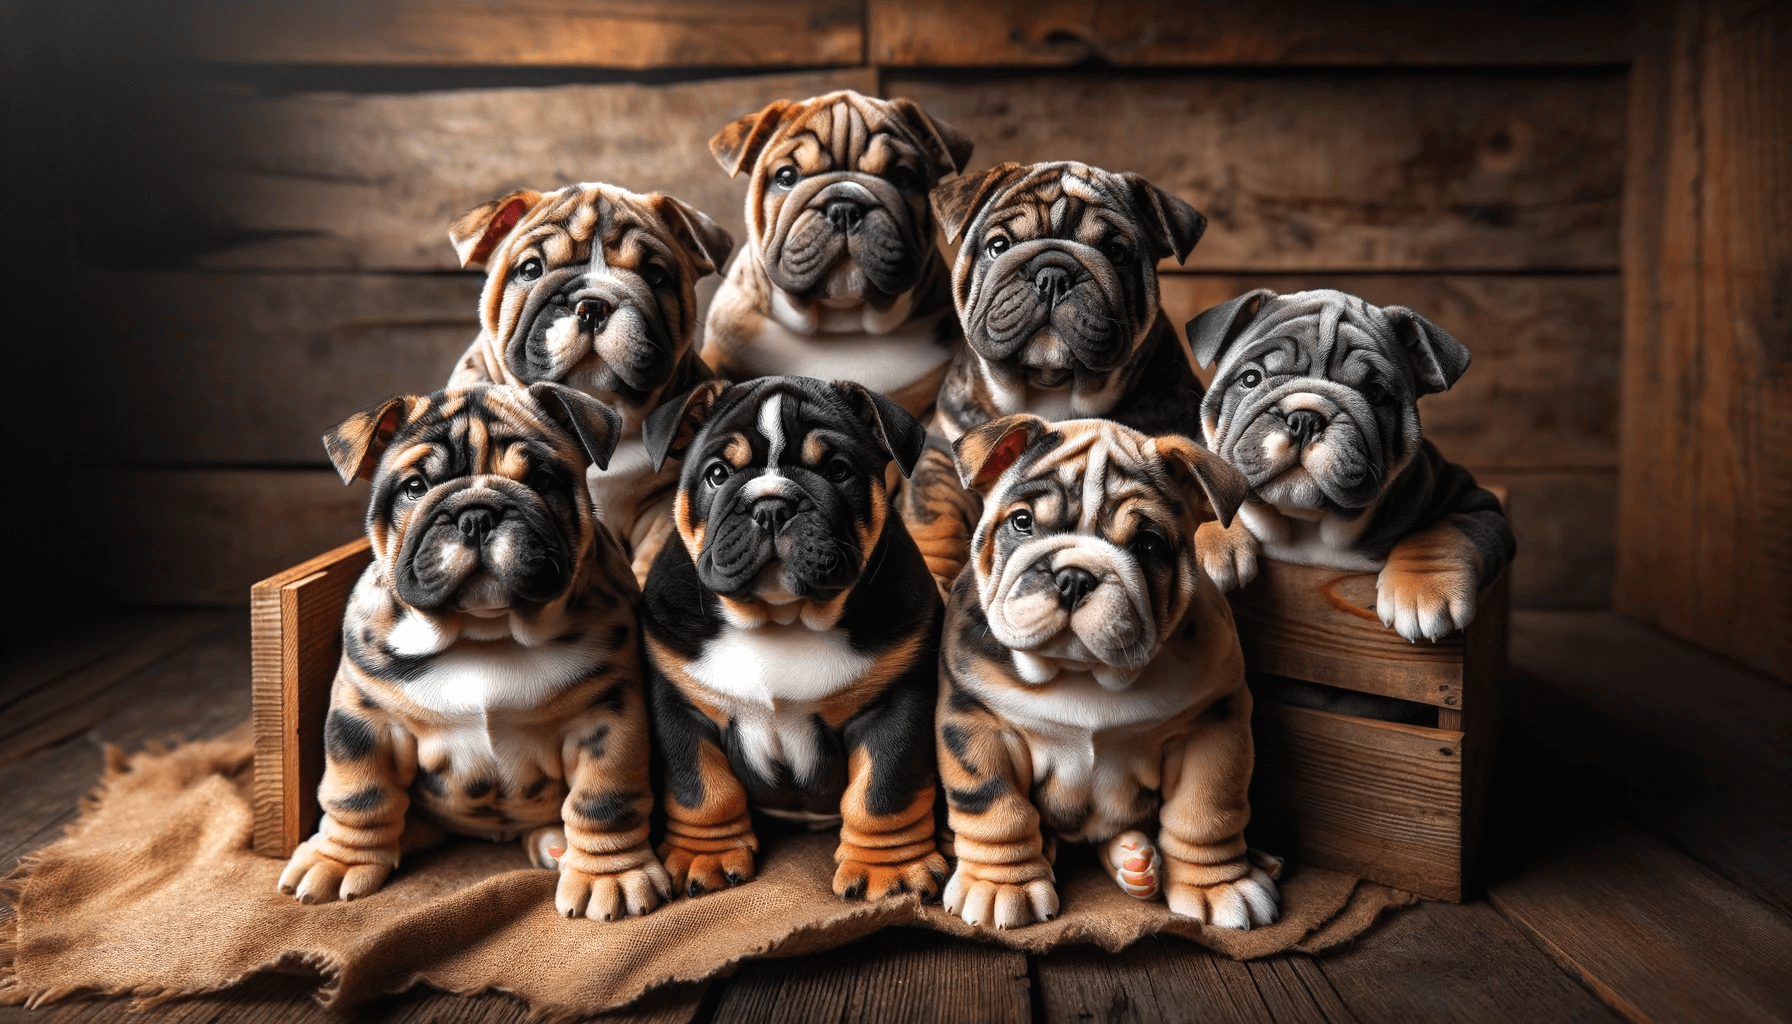 Exotic Bully puppies huddled together showcasing their chunky bodies and wide stances indicative of their breed.